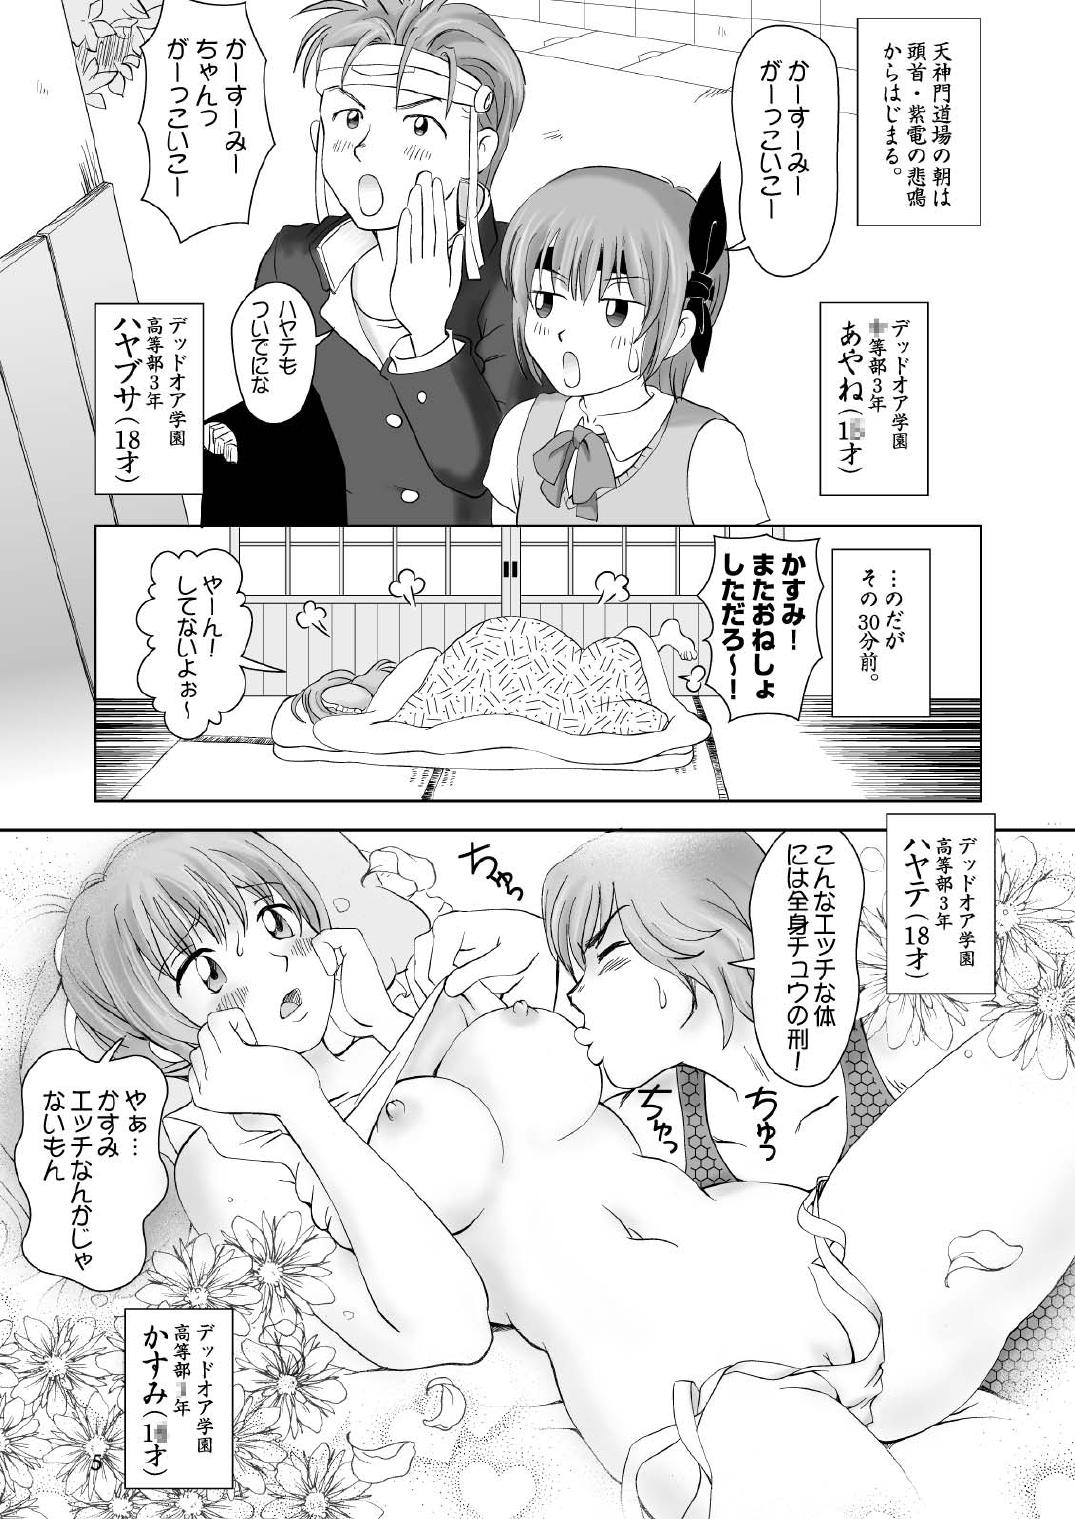 Metendo Sugoiyo!! Kasumi-chan 2 - Dead or alive Amatures Gone Wild - Page 5